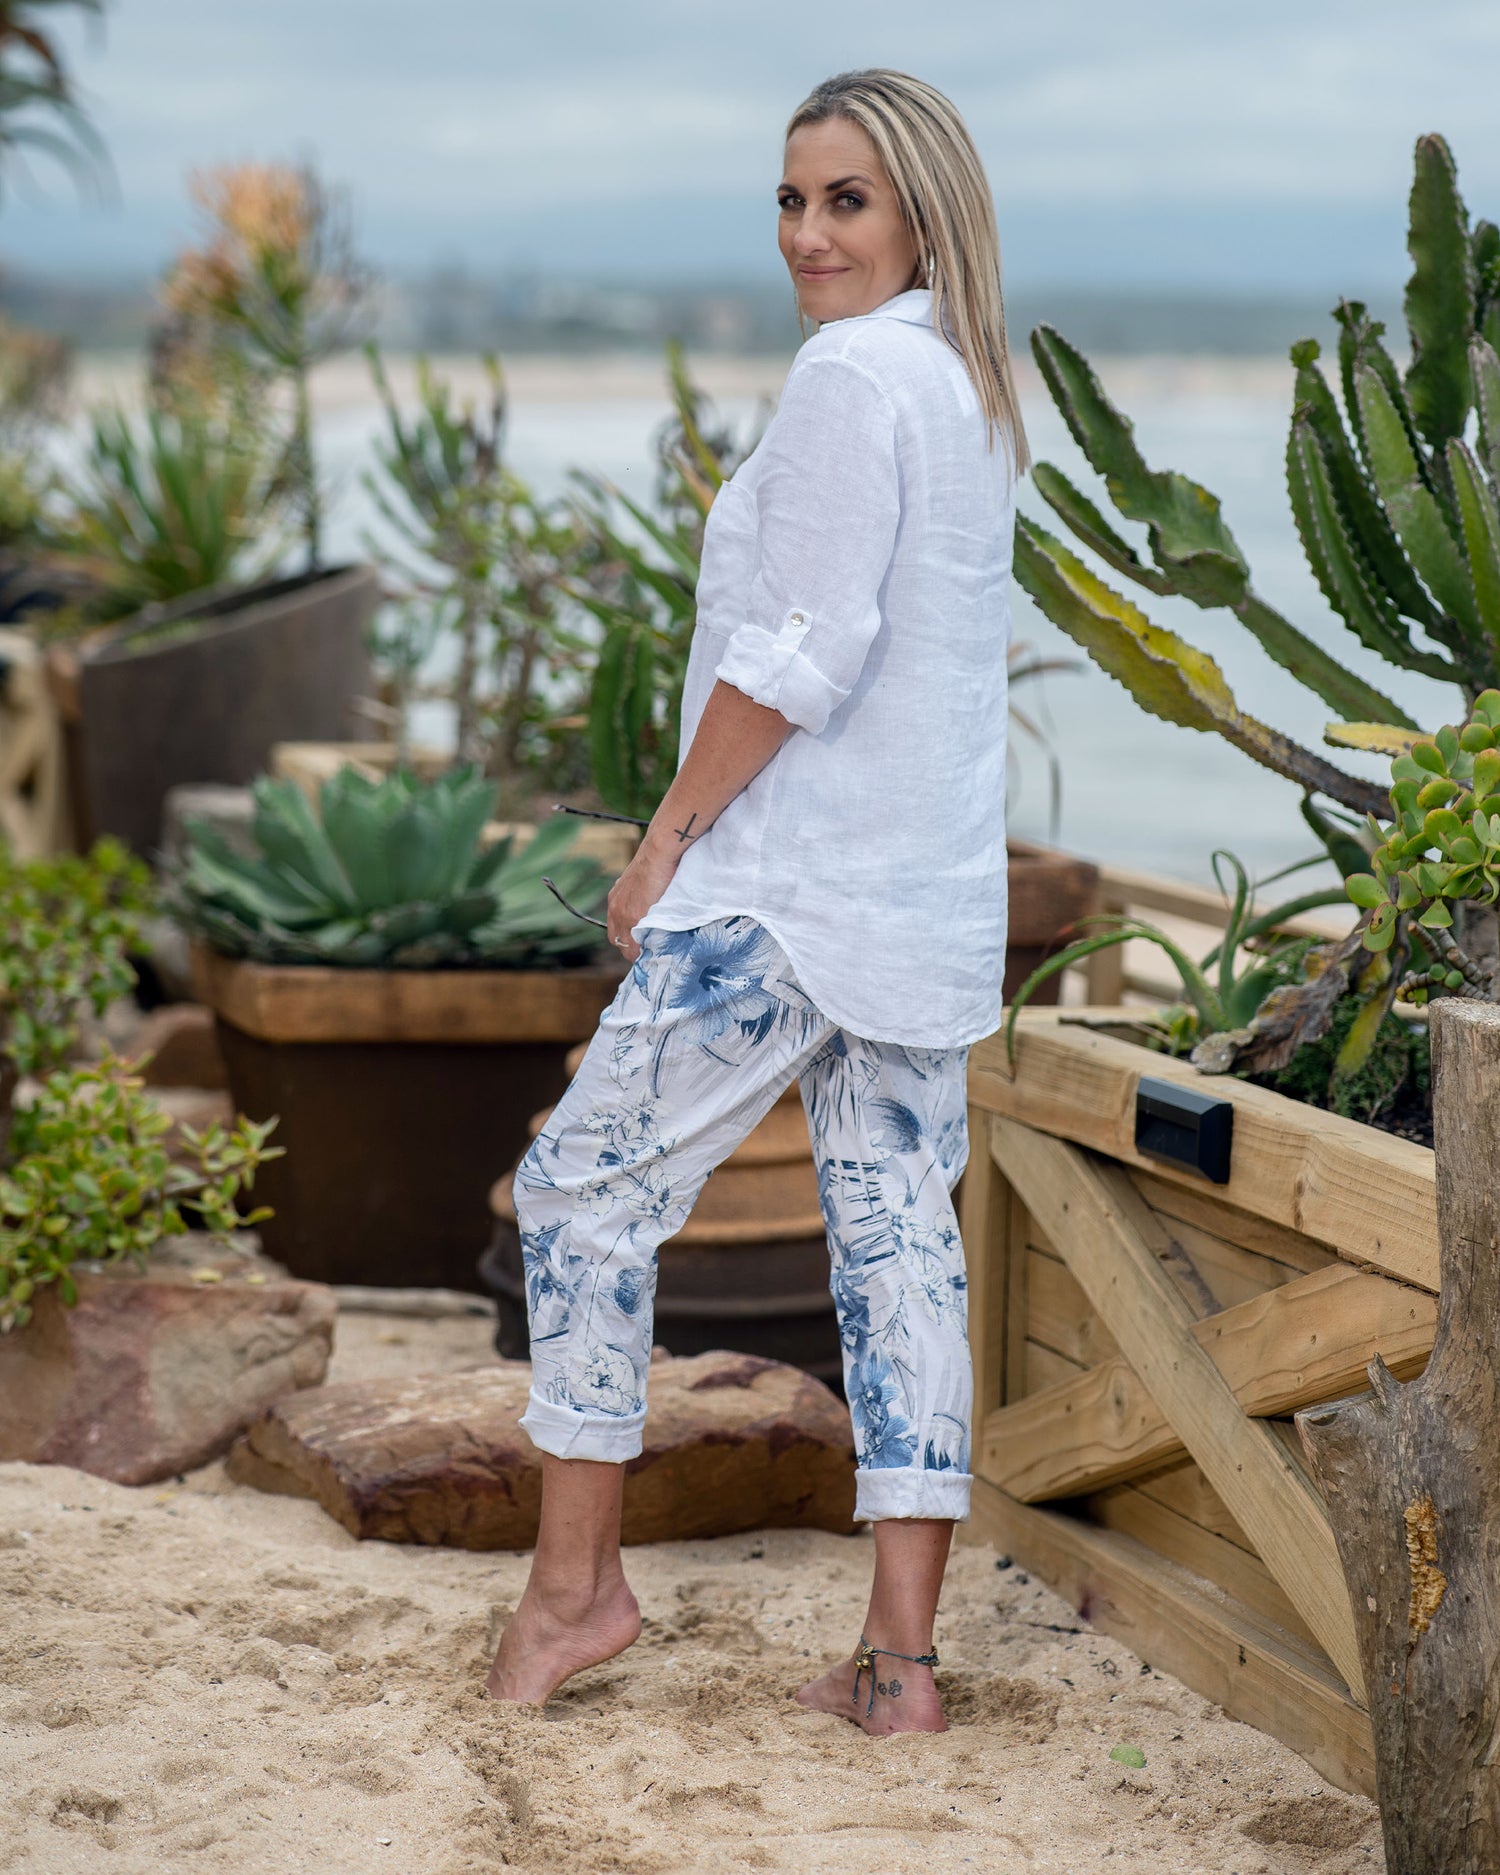 The 3/4 sleeves strike the perfect balance between coverage and breathability, making this top ideal for transitioning between seasons. Decorative front pocket that adds a subtle yet distinctive element to the design. Beautiful round cut hem adds a feminine touch